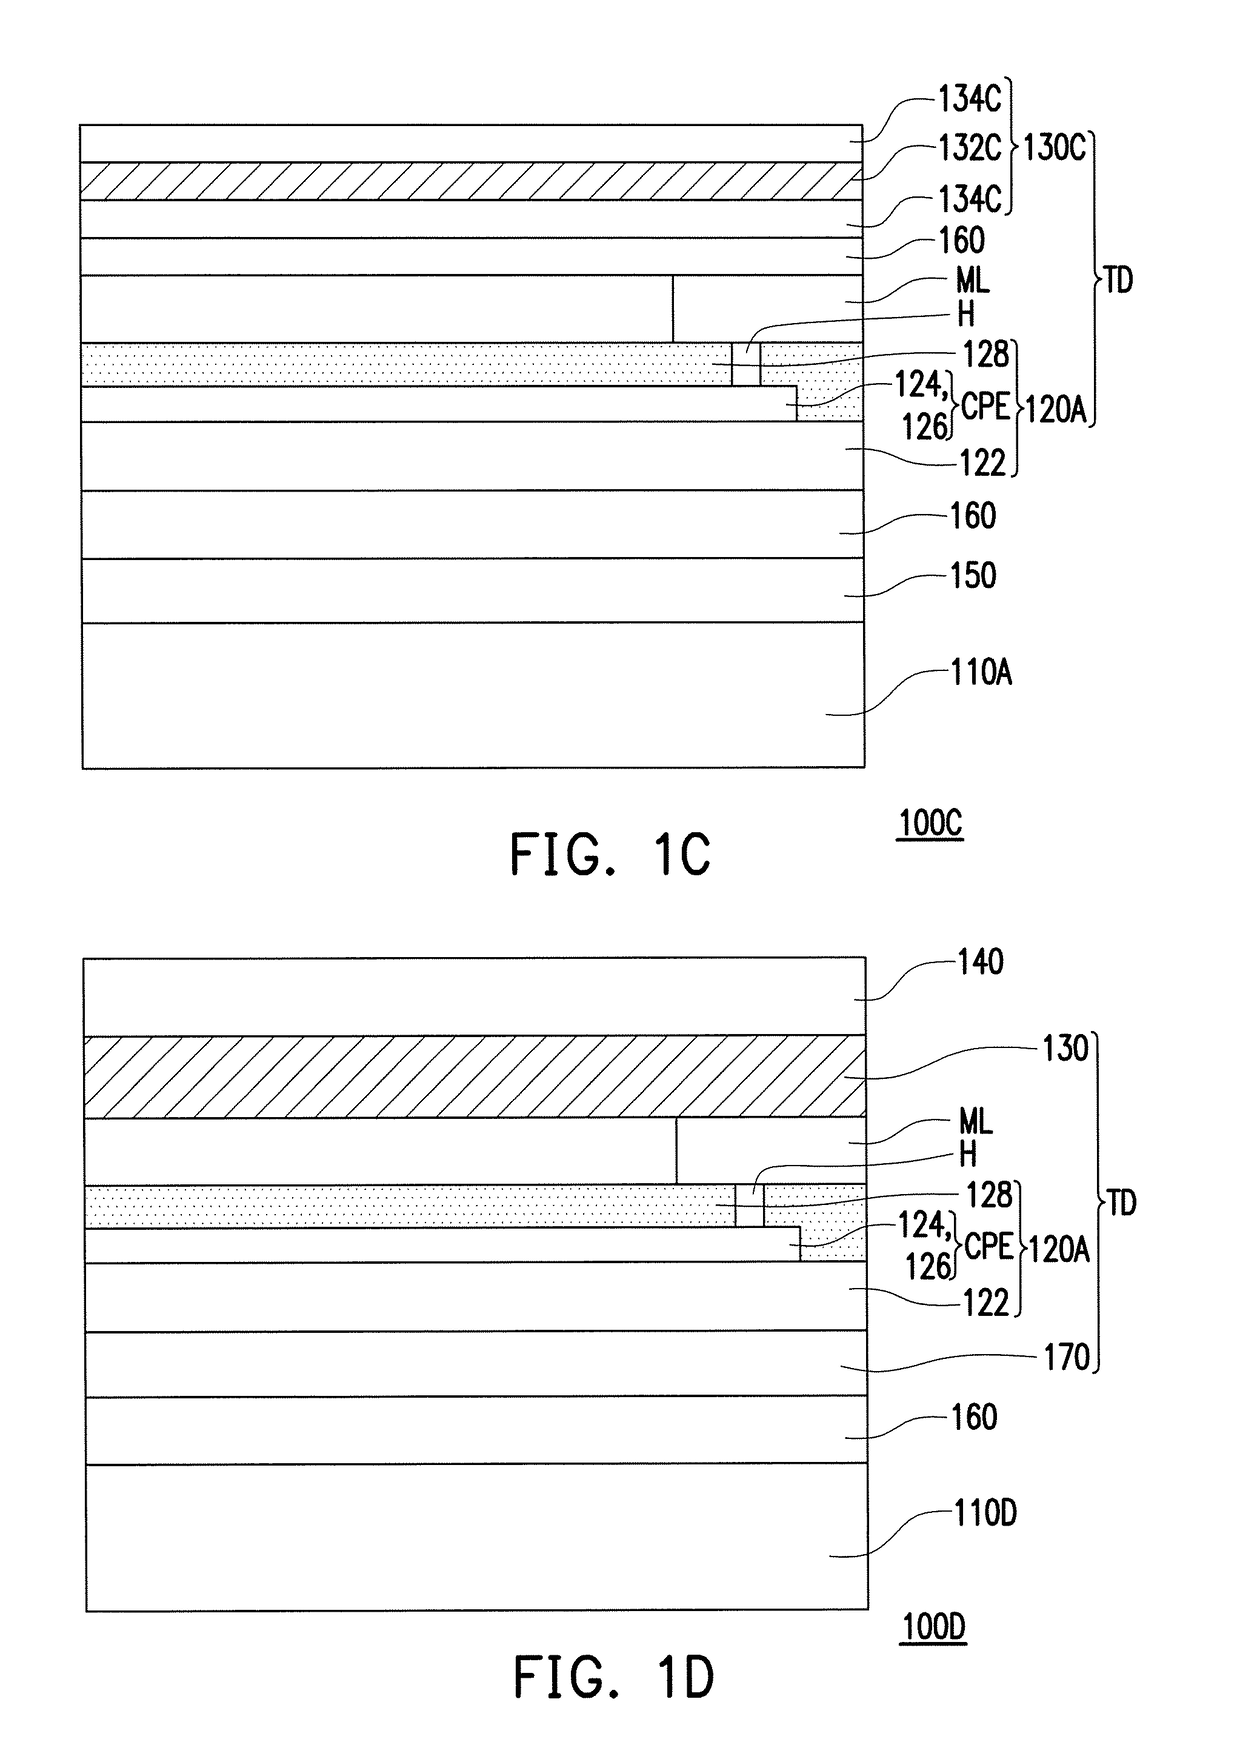 Touch organic light-emitting diode display device and touch device